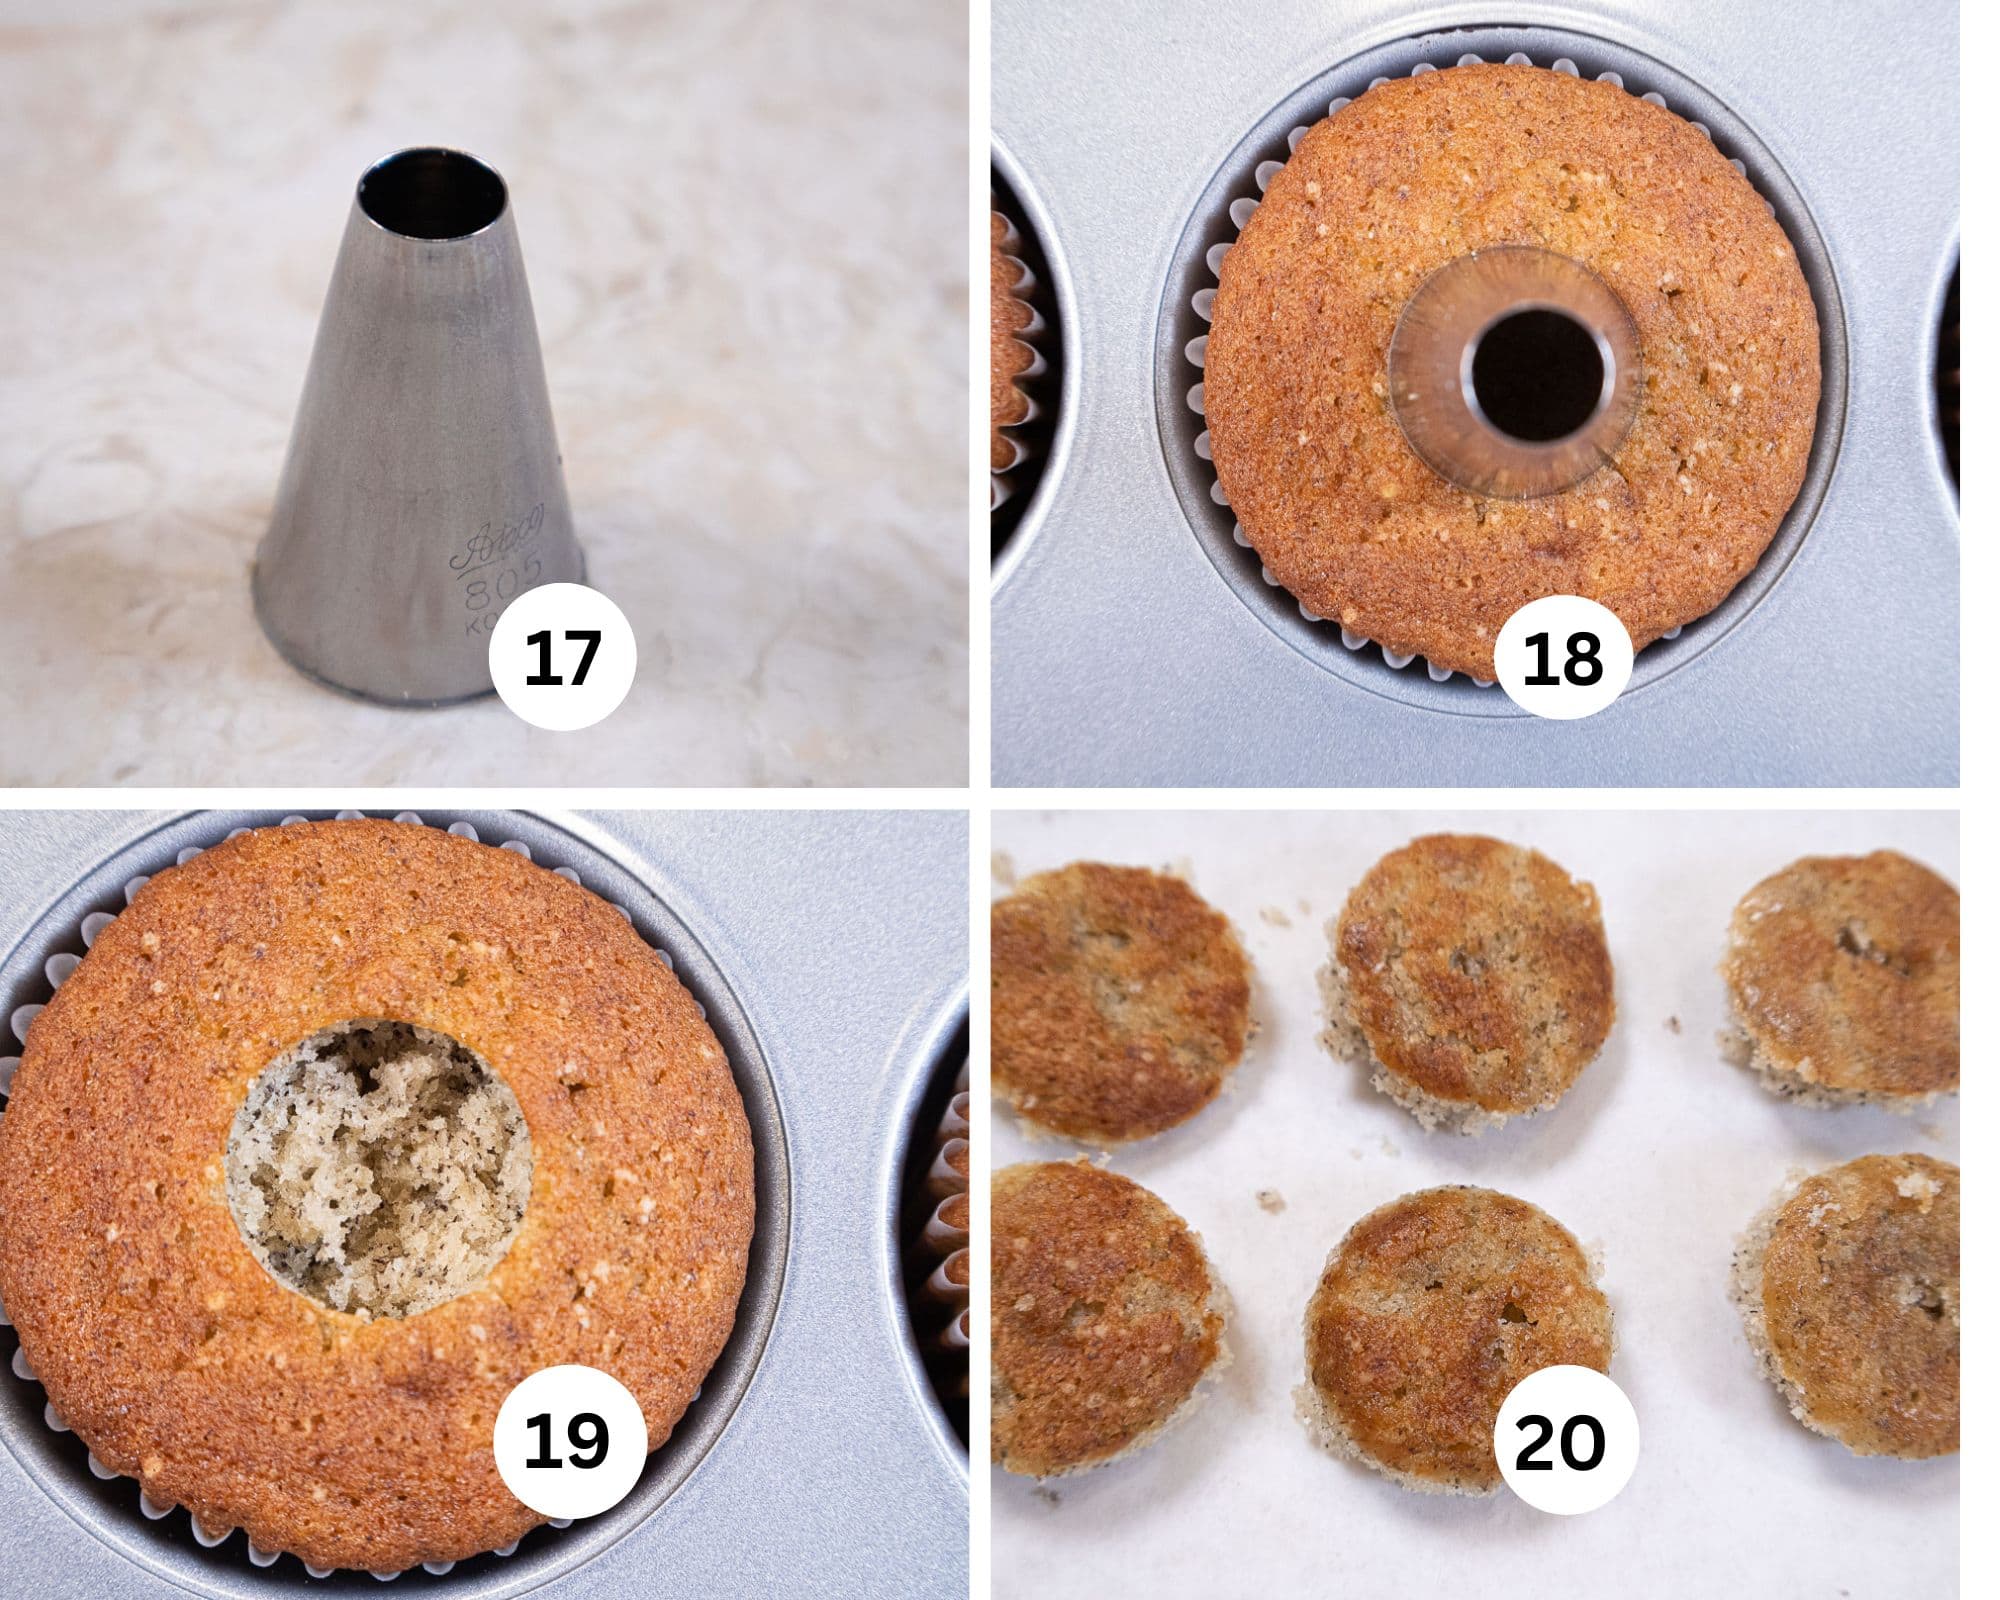 To fill the Banana Split Cupcakes, a large plain piping tip is used by placing it in th center of the baked cupcake and tunneling out the cupcake.  The plugs are shown in the last photo.